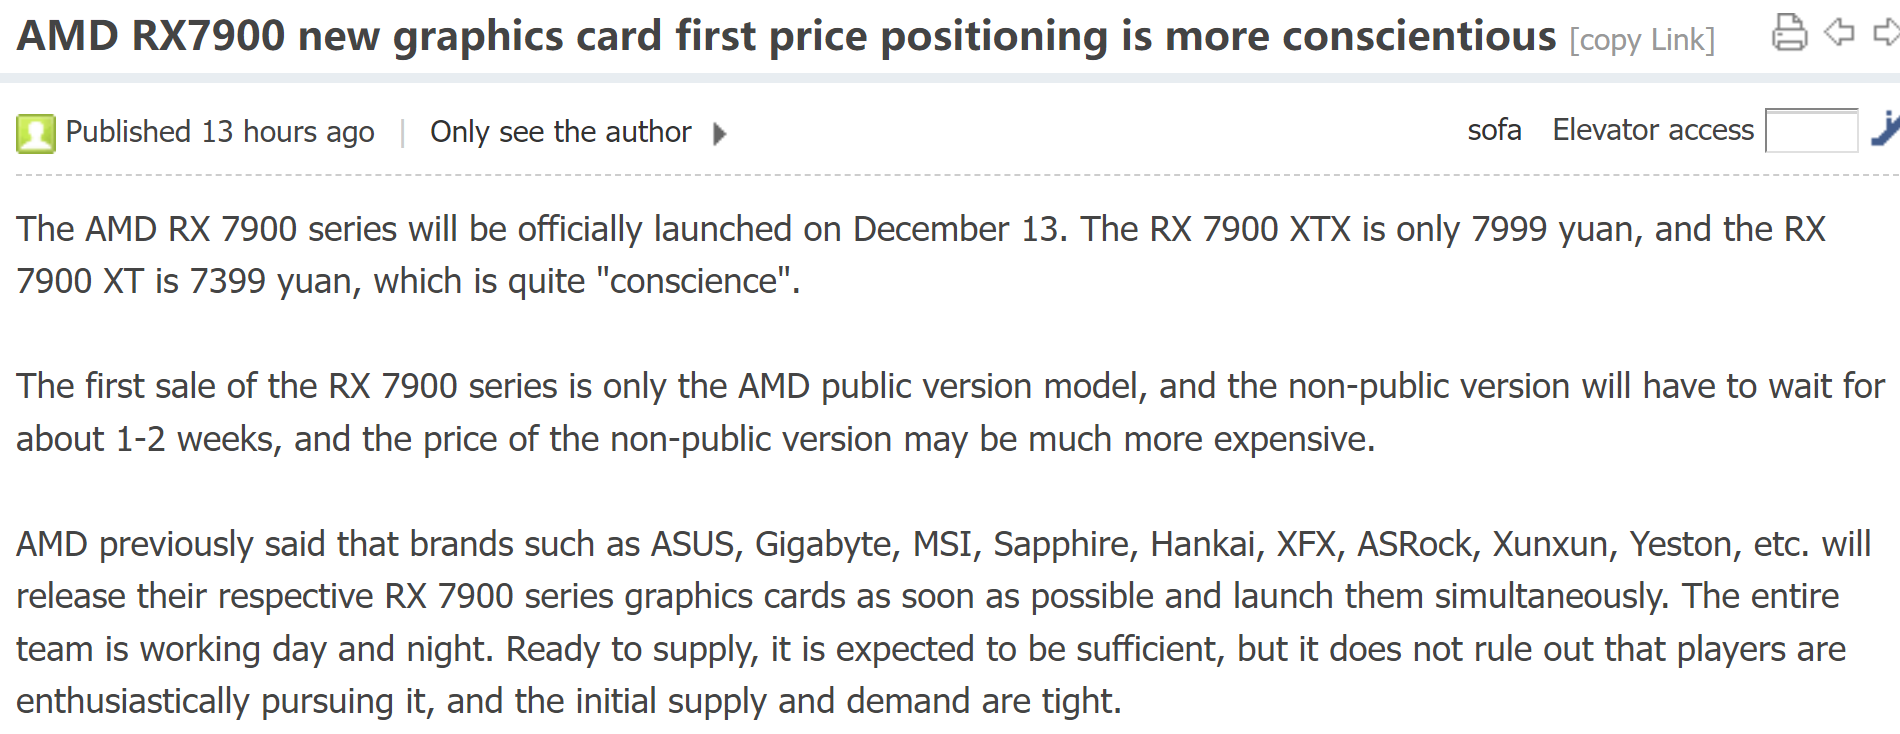 AMD-RADEON-RX-7900-LAUNCH-INFO.png